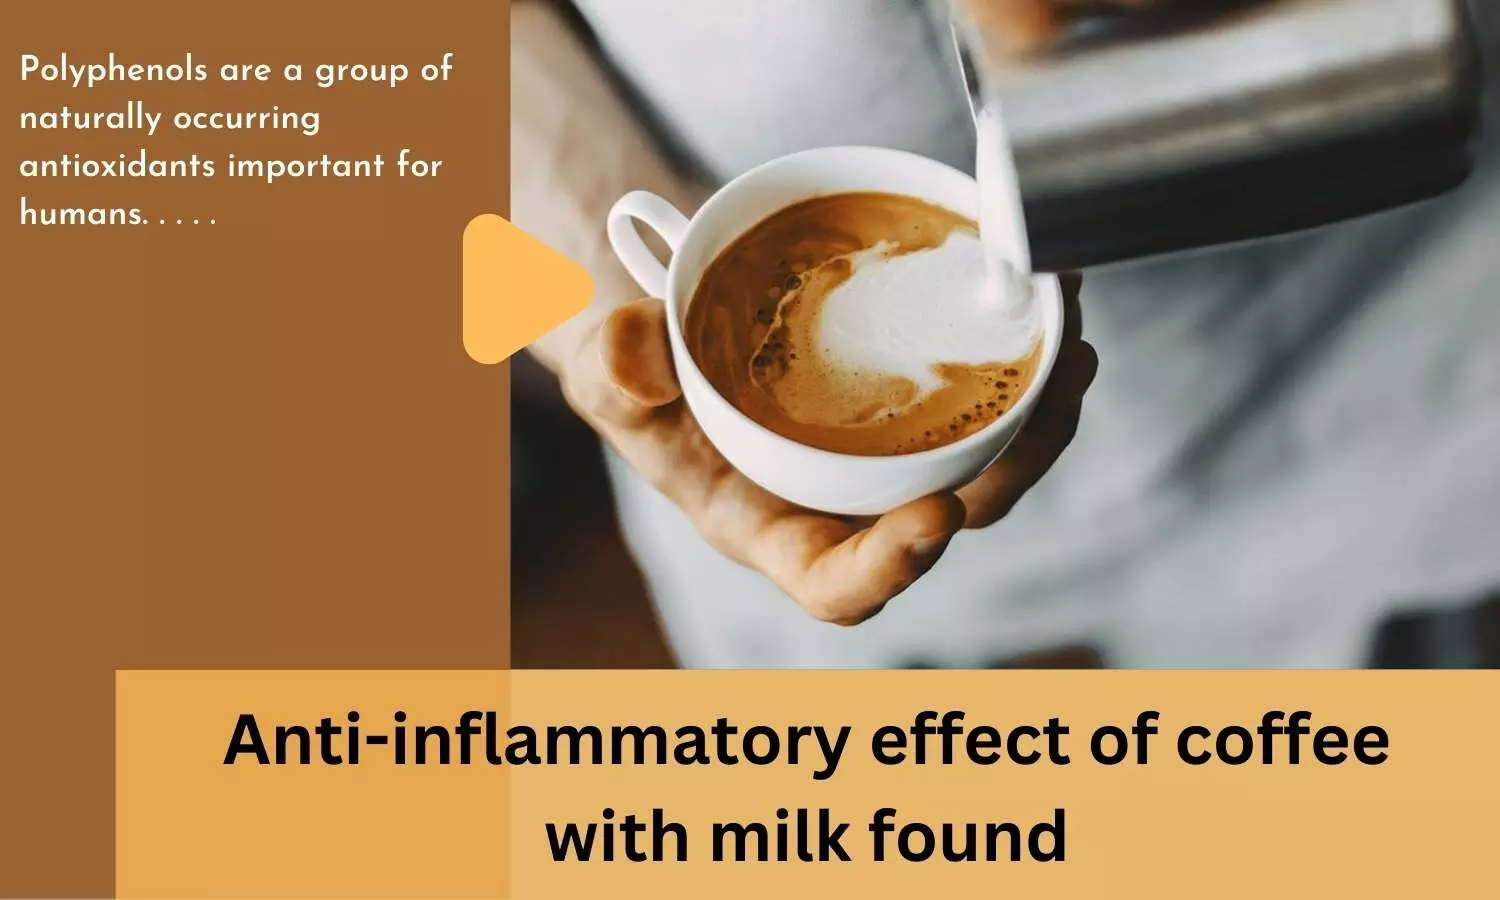 Anti-inflammatory effect of coffee with milk found